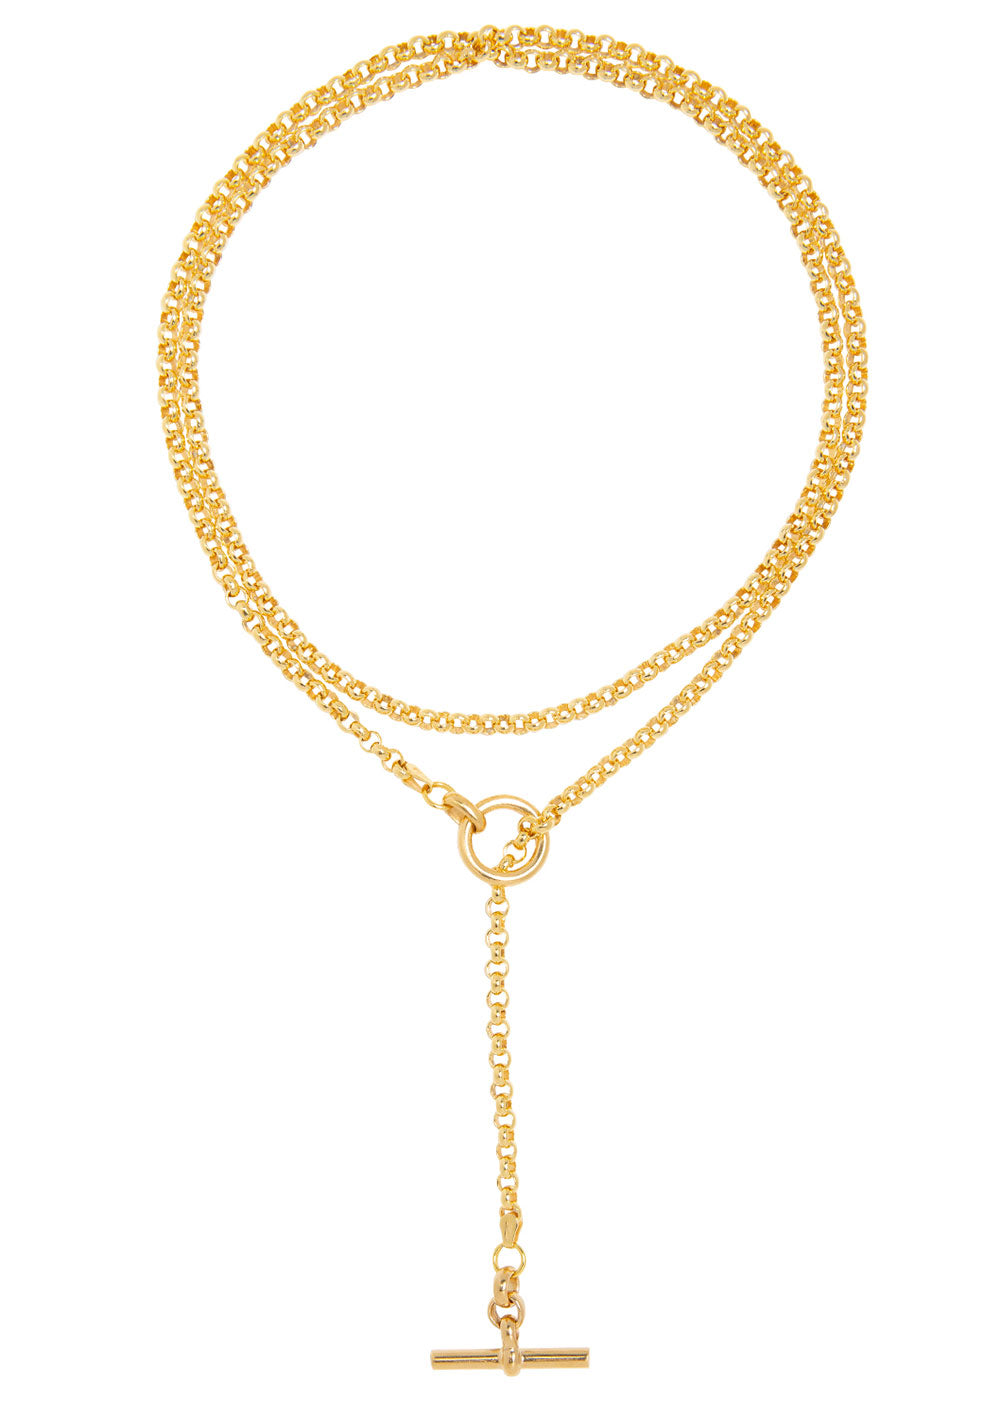 Tilly Sveaas Gold Lariat Necklace